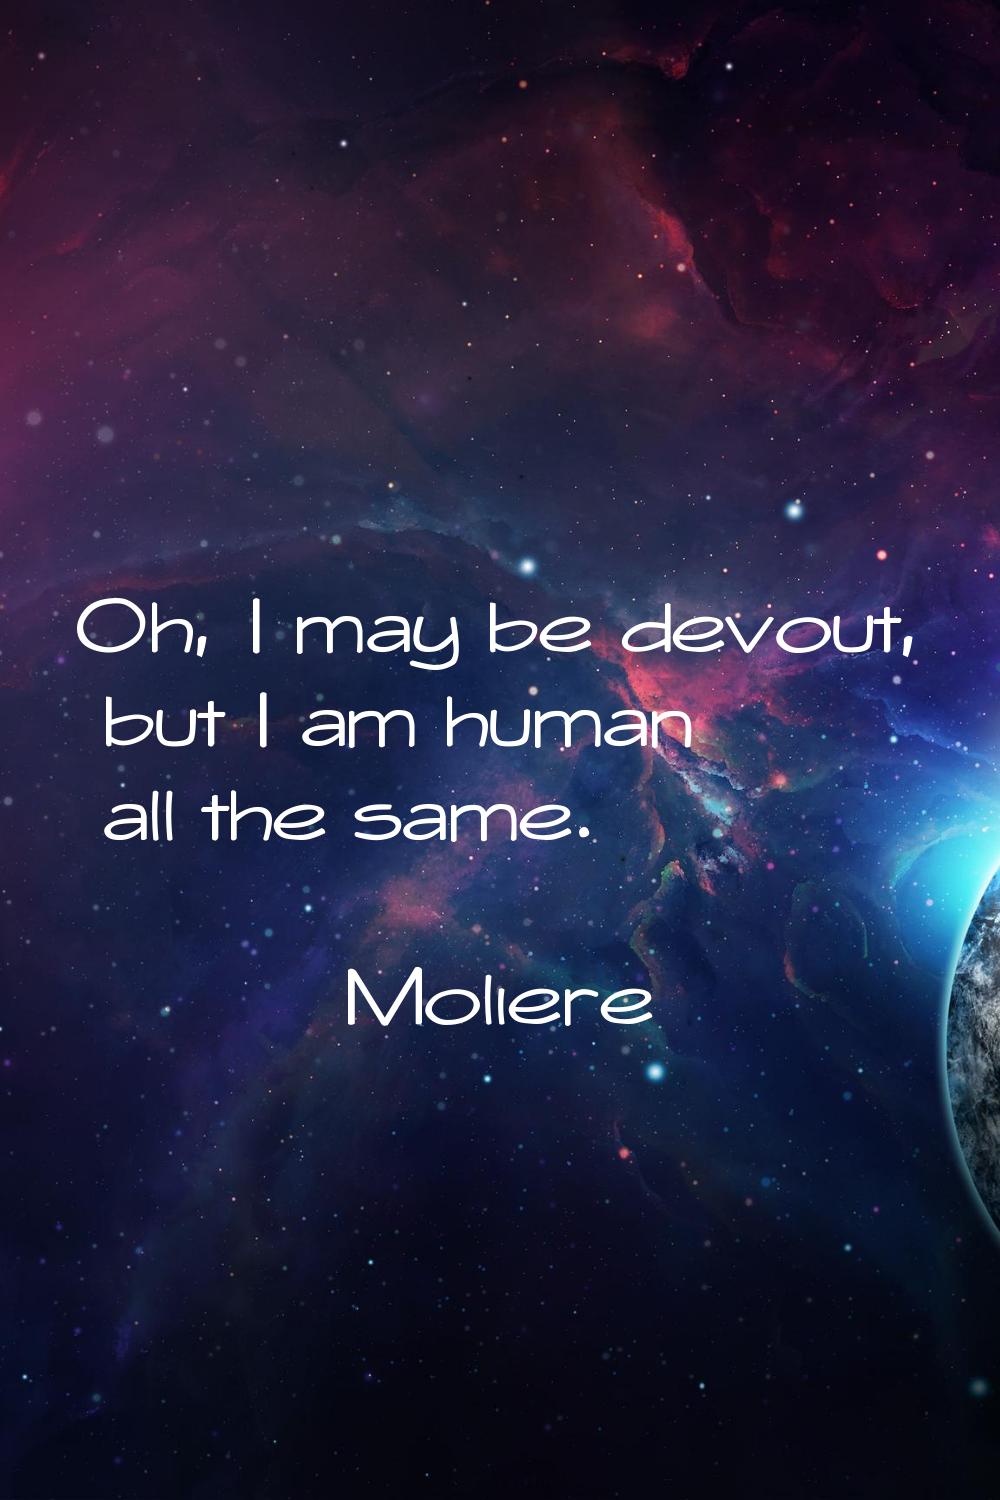 Oh, I may be devout, but I am human all the same.